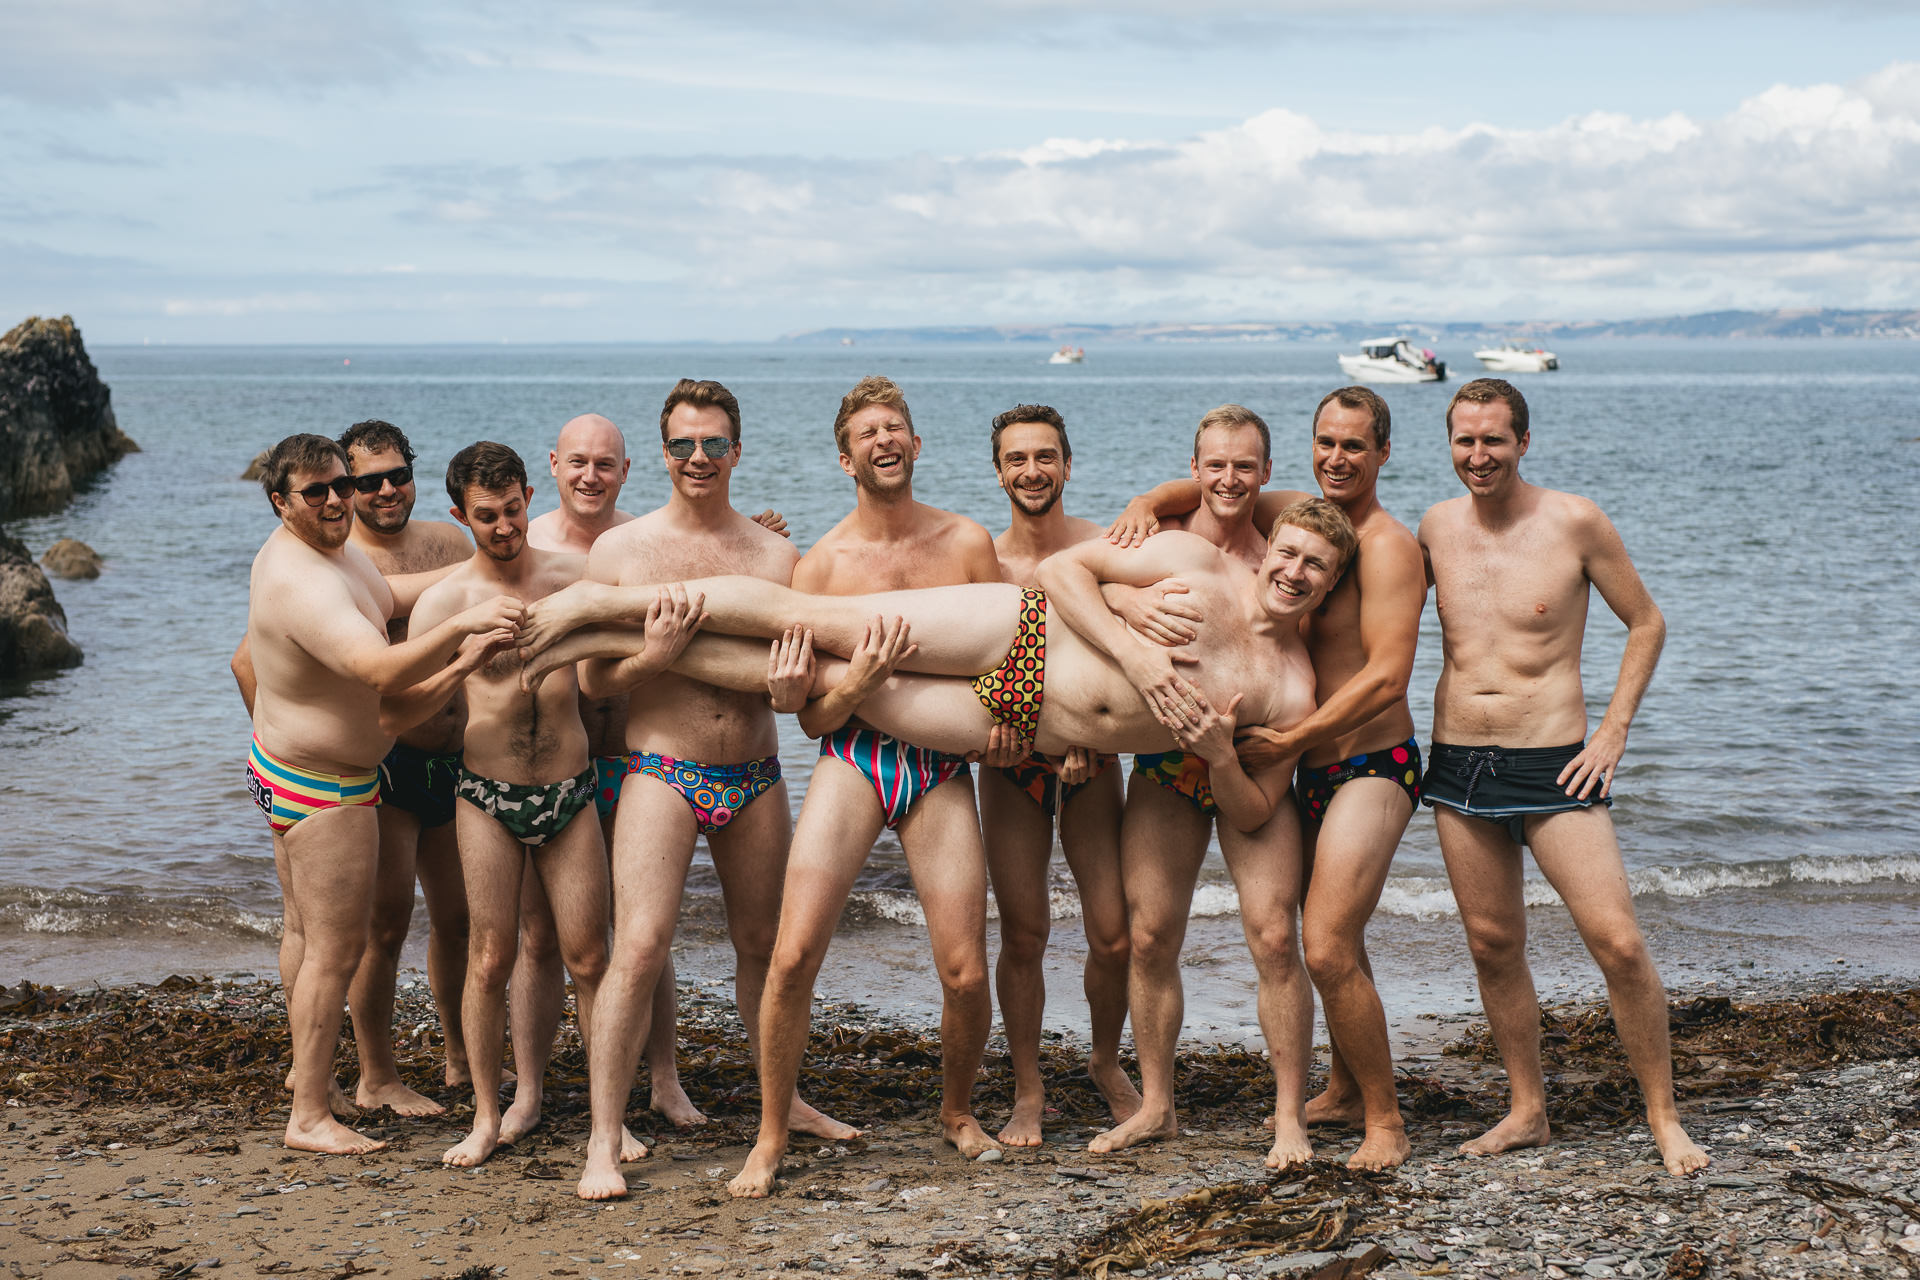 Groom and friends on the beach in swimming trunks